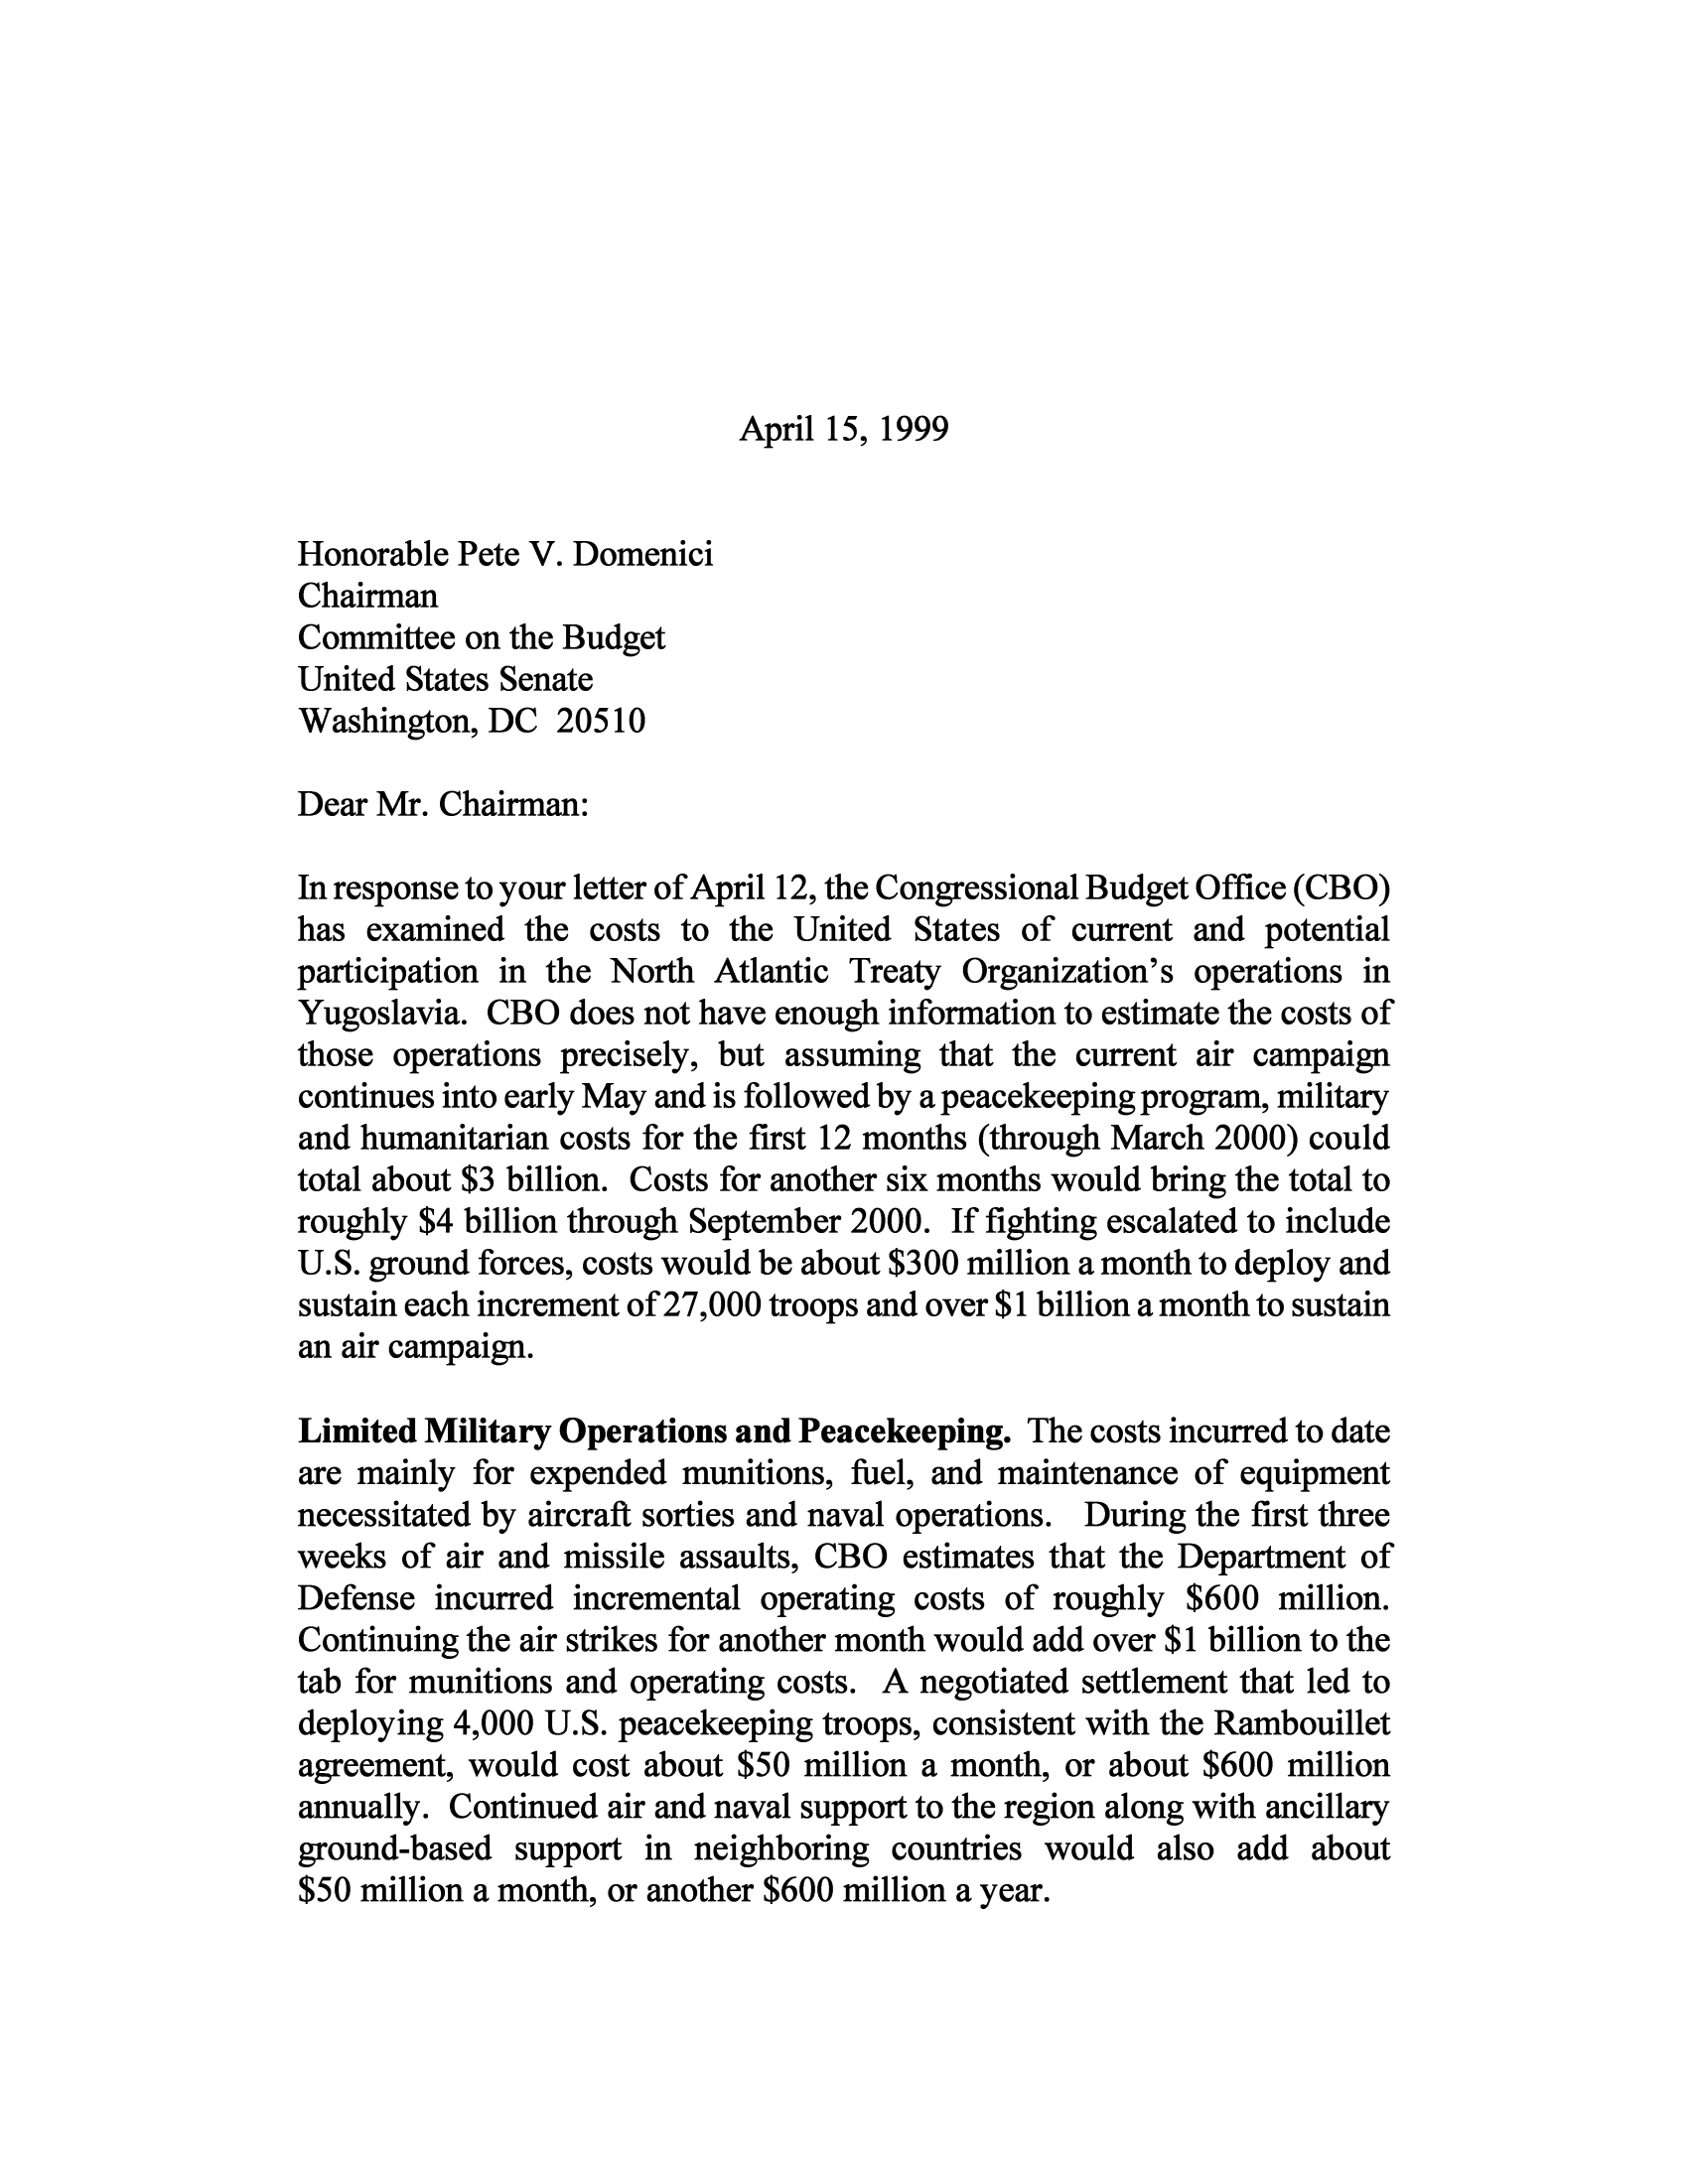 handle is hein.congrec/cbo9967 and id is 1 raw text is: April 15, 1999

Honorable Pete V. Domenici
Chairman
Committee on the Budget
United States Senate
Washington, DC 20510
Dear Mr. Chairman:
In response to your letter of April 12, the Congressional Budget Office (CBO)
has examined the costs to the United States of current and potential
participation in the North Atlantic Treaty Organization's operations in
Yugoslavia. CBO does not have enough information to estimate the costs of
those operations precisely, but assuming that the current air campaign
continues into early May and is followed by a peacekeeping program, military
and humanitarian costs for the first 12 months (through March 2000) could
total about $3 billion. Costs for another six months would bring the total to
roughly $4 billion through September 2000. If fighting escalated to include
U.S. ground forces, costs would be about $300 million a month to deploy and
sustain each increment of 27,000 troops and over $1 billion a month to sustain
an air campaign.
Limited Military Operations and Peacekeeping. The costs incurred to date
are mainly for expended munitions, fuel, and maintenance of equipment
necessitated by aircraft sorties and naval operations. During the first three
weeks of air and missile assaults, CBO estimates that the Department of
Defense incurred incremental operating costs of roughly $600 million.
Continuing the air strikes for another month would add over $1 billion to the
tab for munitions and operating costs. A negotiated settlement that led to
deploying 4,000 U.S. peacekeeping troops, consistent with the Rambouillet
agreement, would cost about $50 million a month, or about $600 million
annually. Continued air and naval support to the region along with ancillary
ground-based support in neighboring countries would also add about
$50 million a month, or another $600 million a year.


